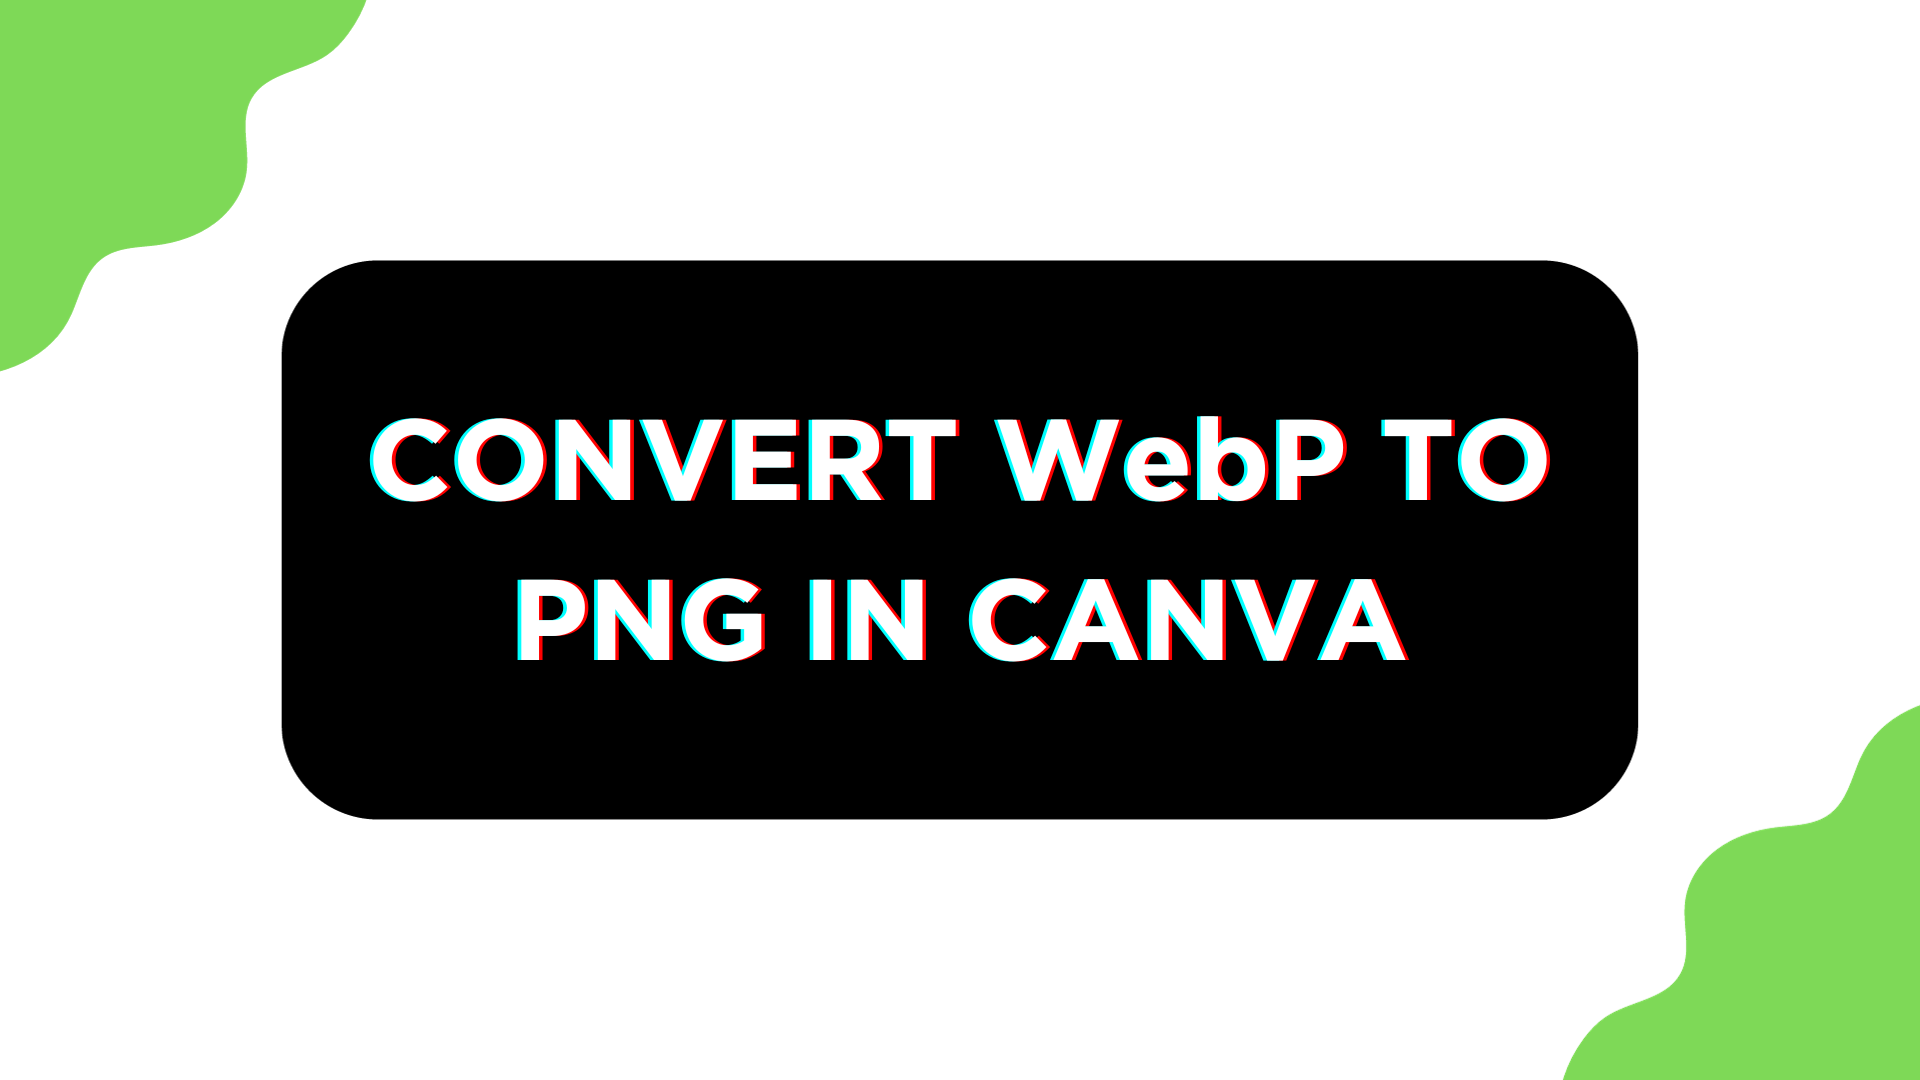 Canva WebP to PNG conversion with transparent background